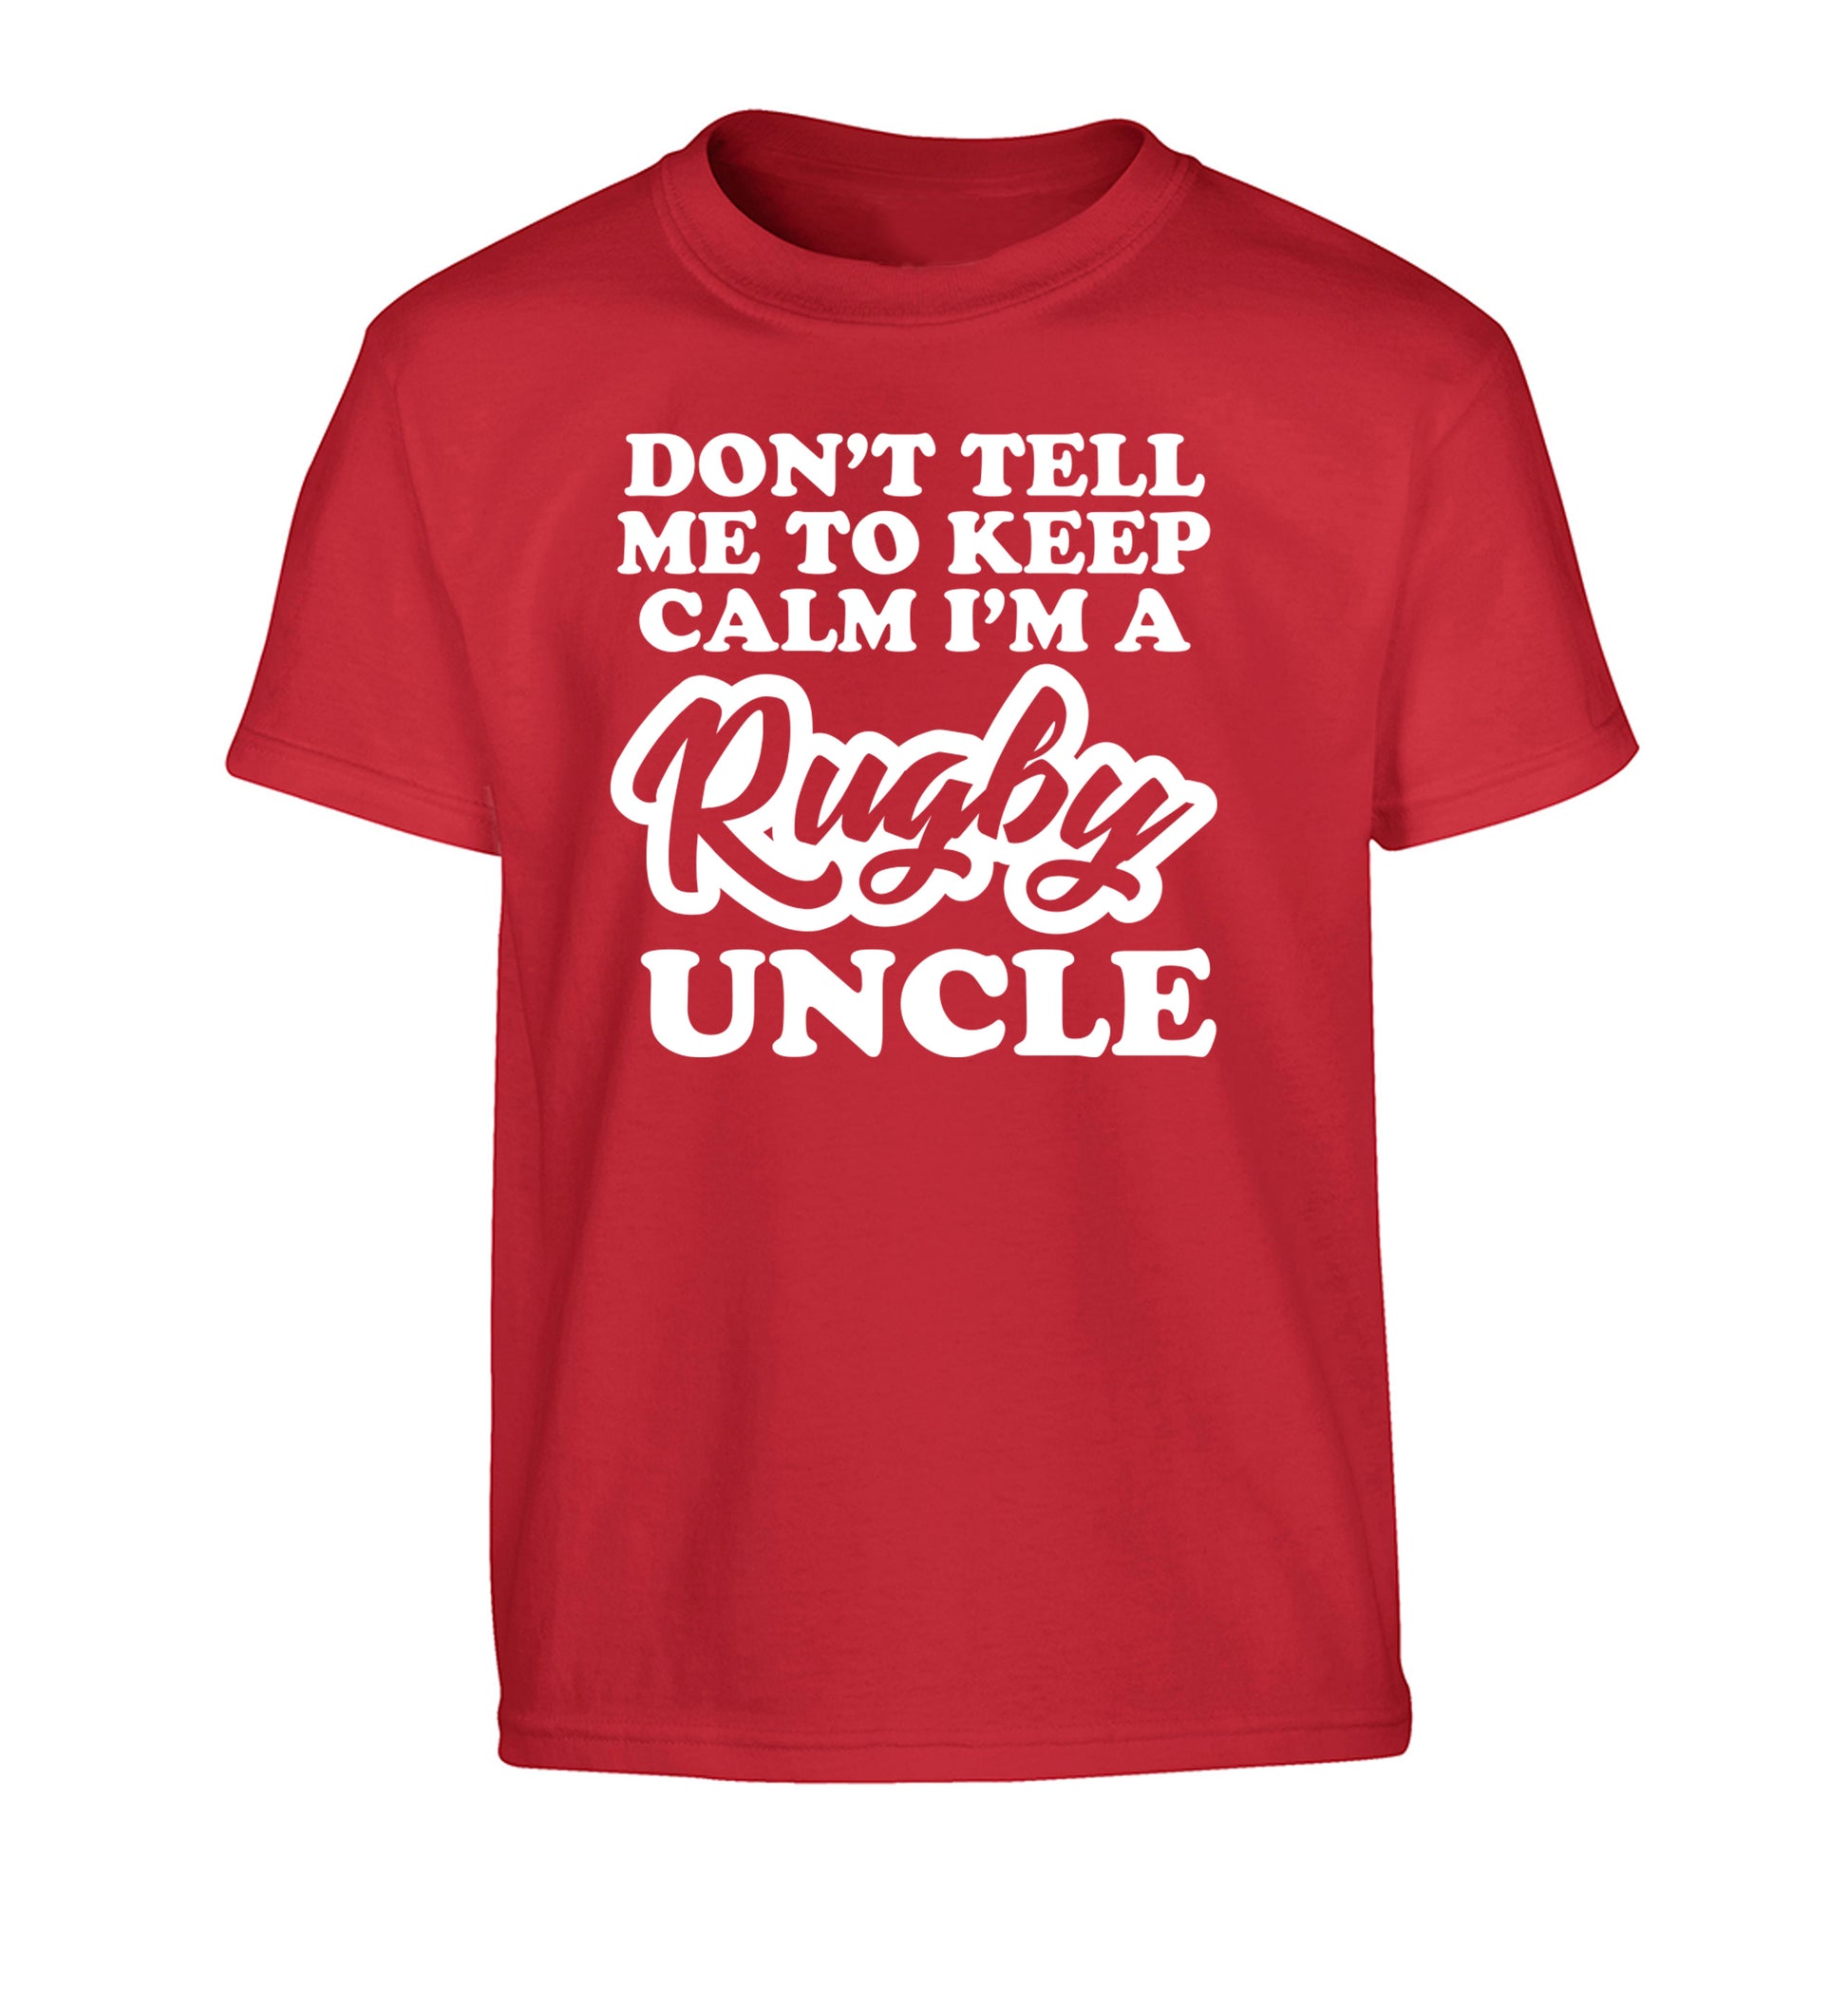 Don't tell me to keep calm I'm a rugby uncle Children's red Tshirt 12-13 Years